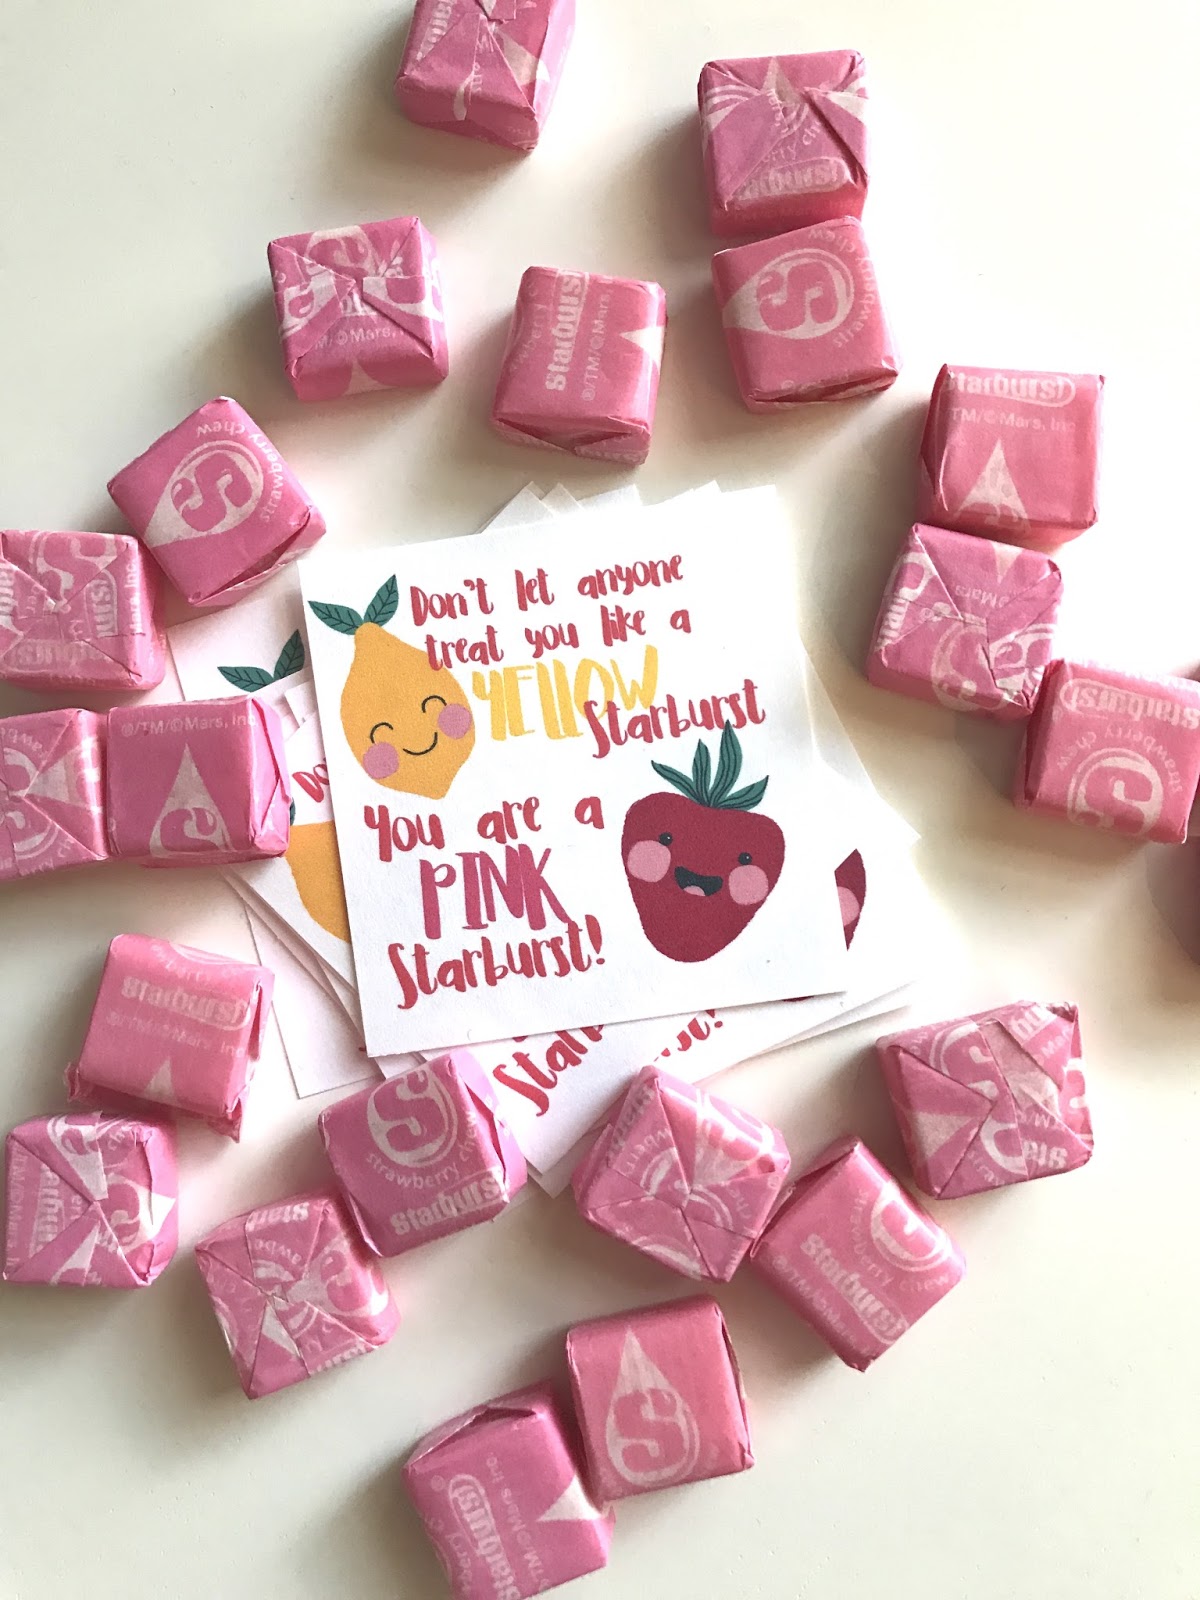 Little Bit Funky: You Are A Pink Starburst {gift tag - free printable}